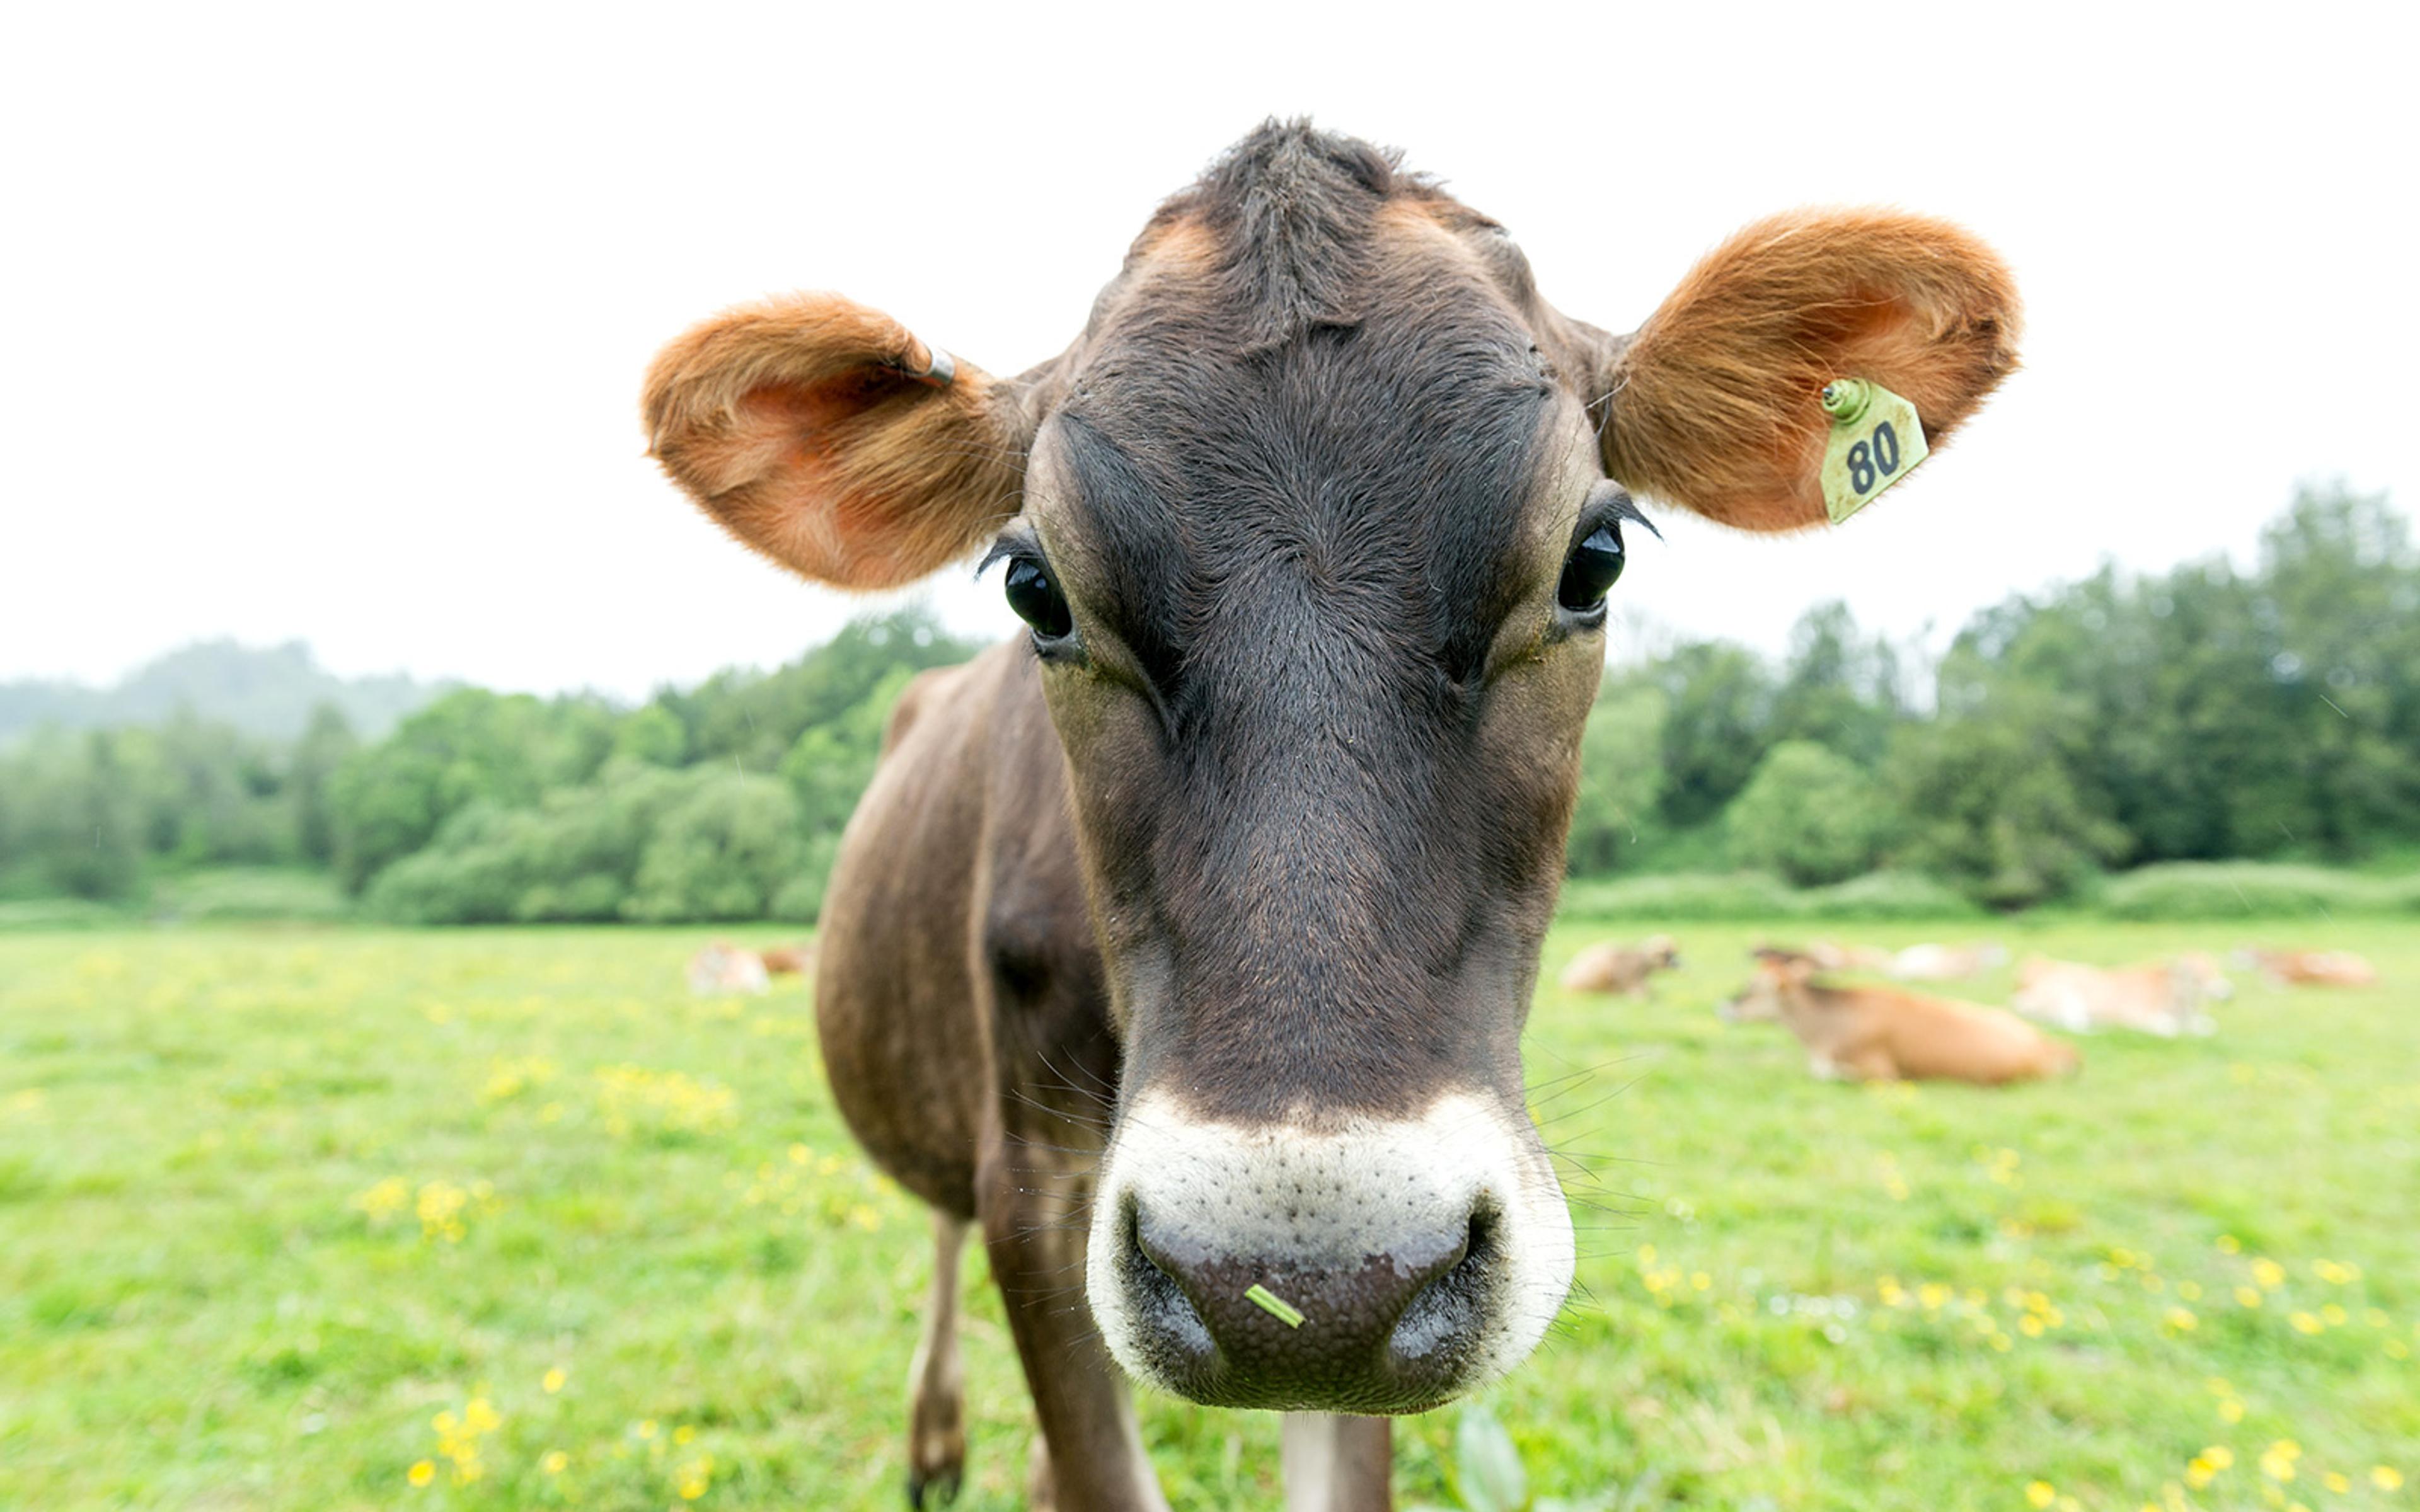 A close-up view of a Jersey cow on organic pasture.